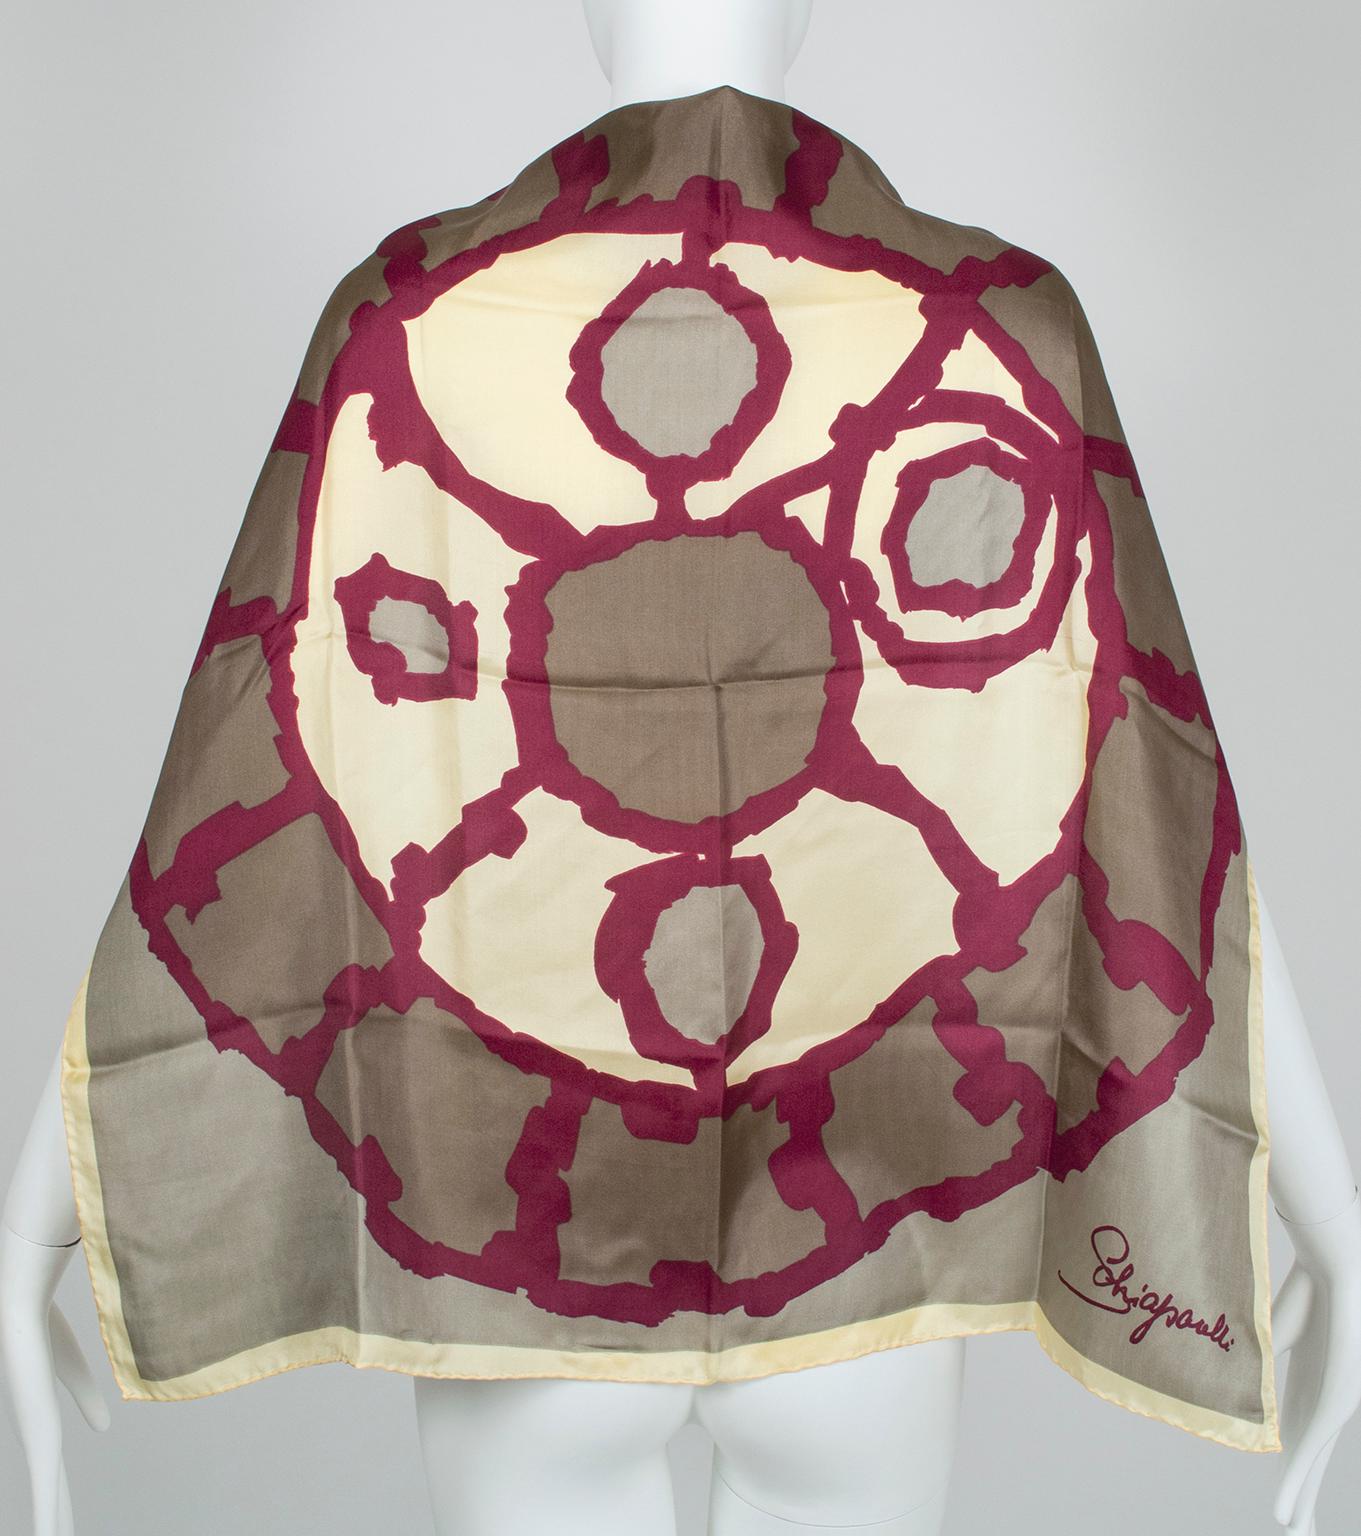 Elsa Schiaparelli's penchant for the unusual was well-documented through her association with Surrealist art. Her bent toward mysticism, however, is less well known but reflected in this scarf portraying a stylized version of a Mayan Cipher